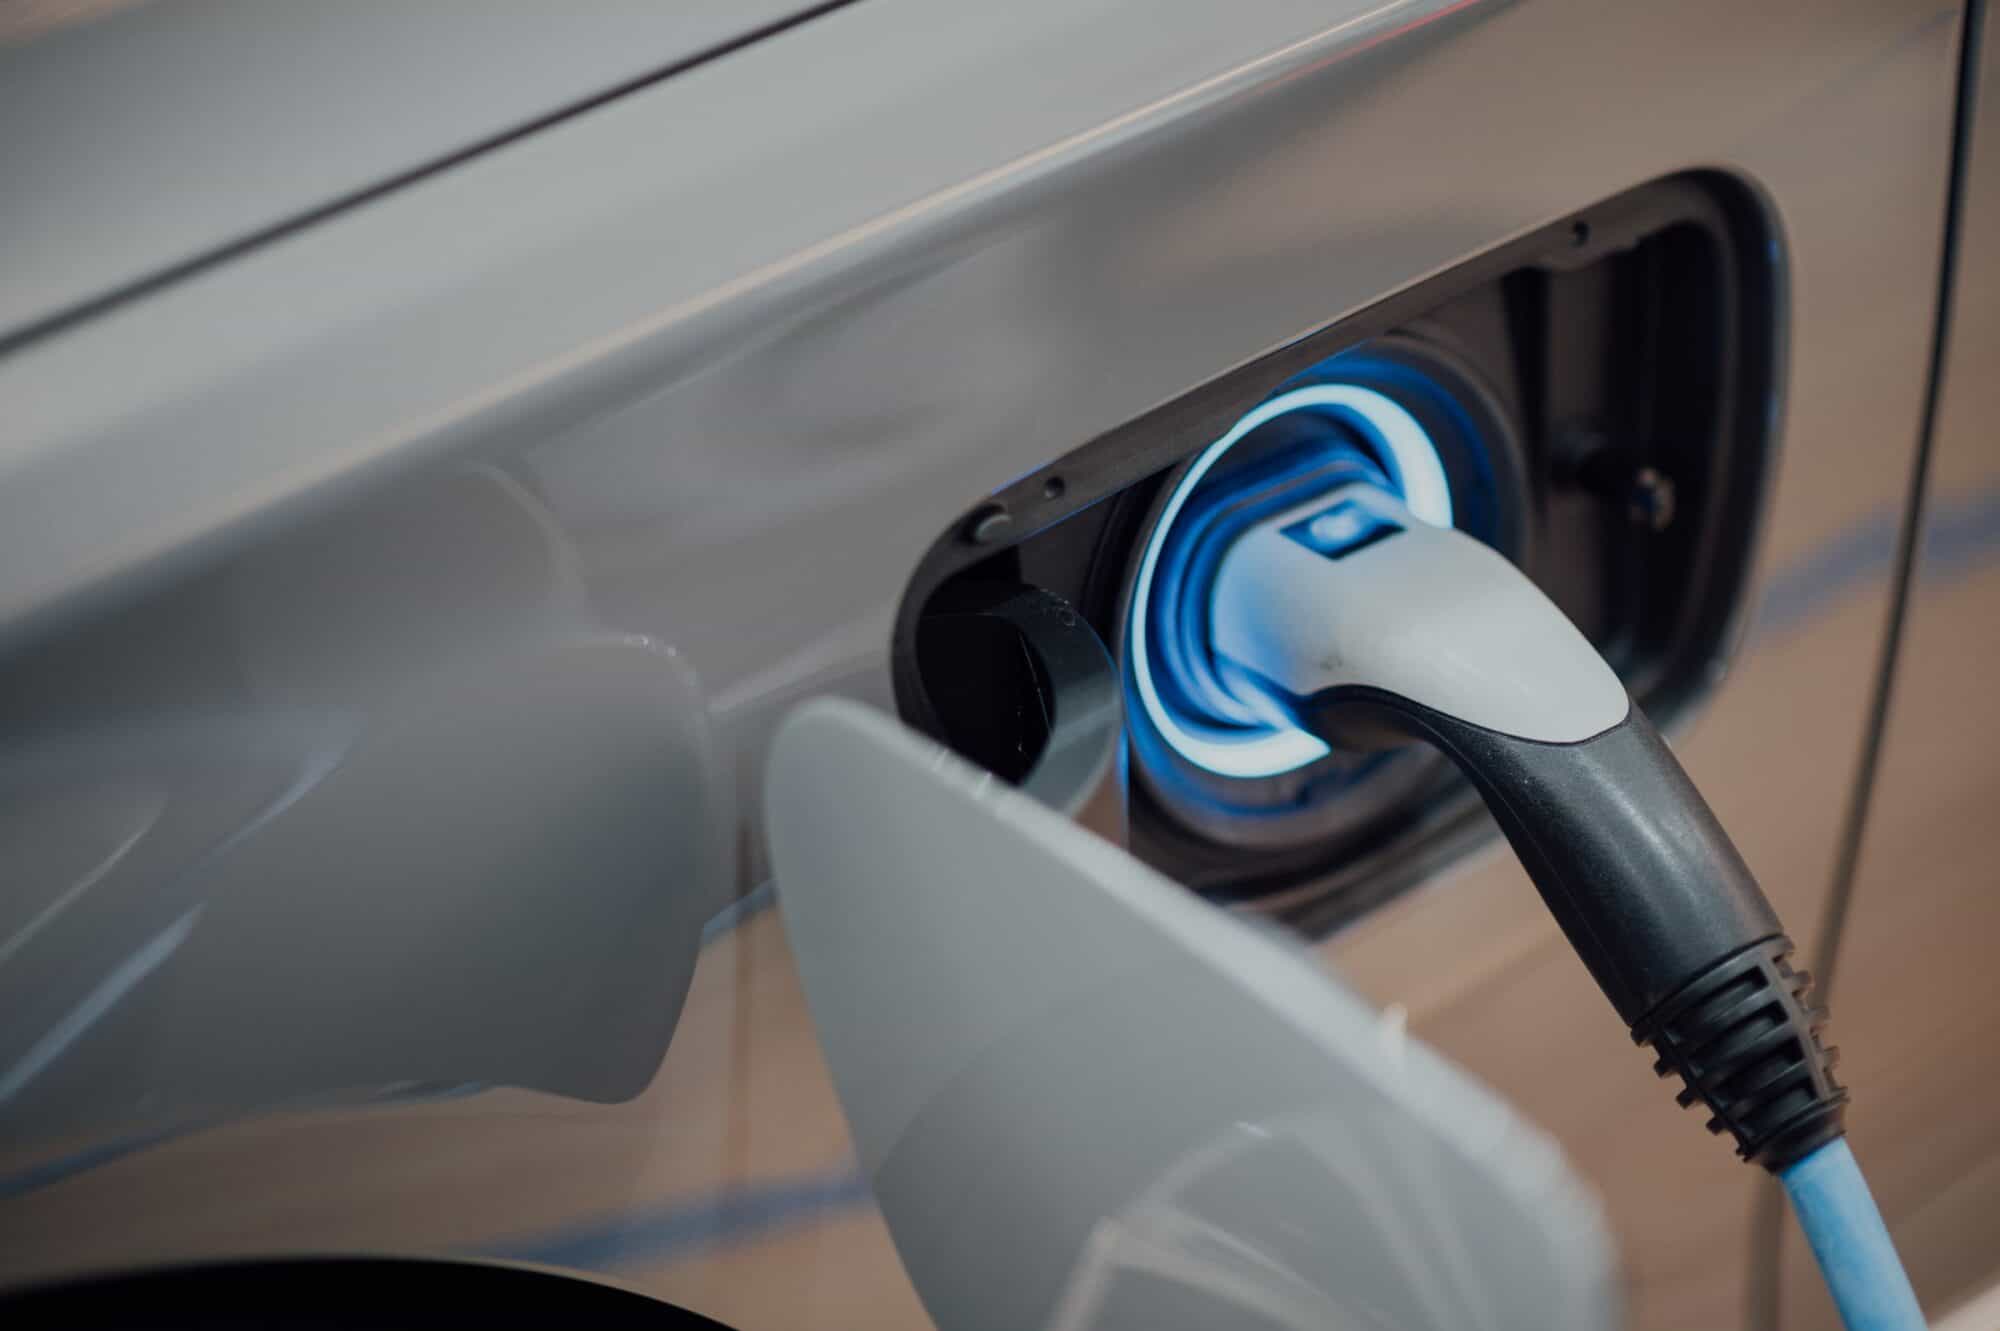 Budget 2022 bets on electric cars and tech incentives to decarbonize economy